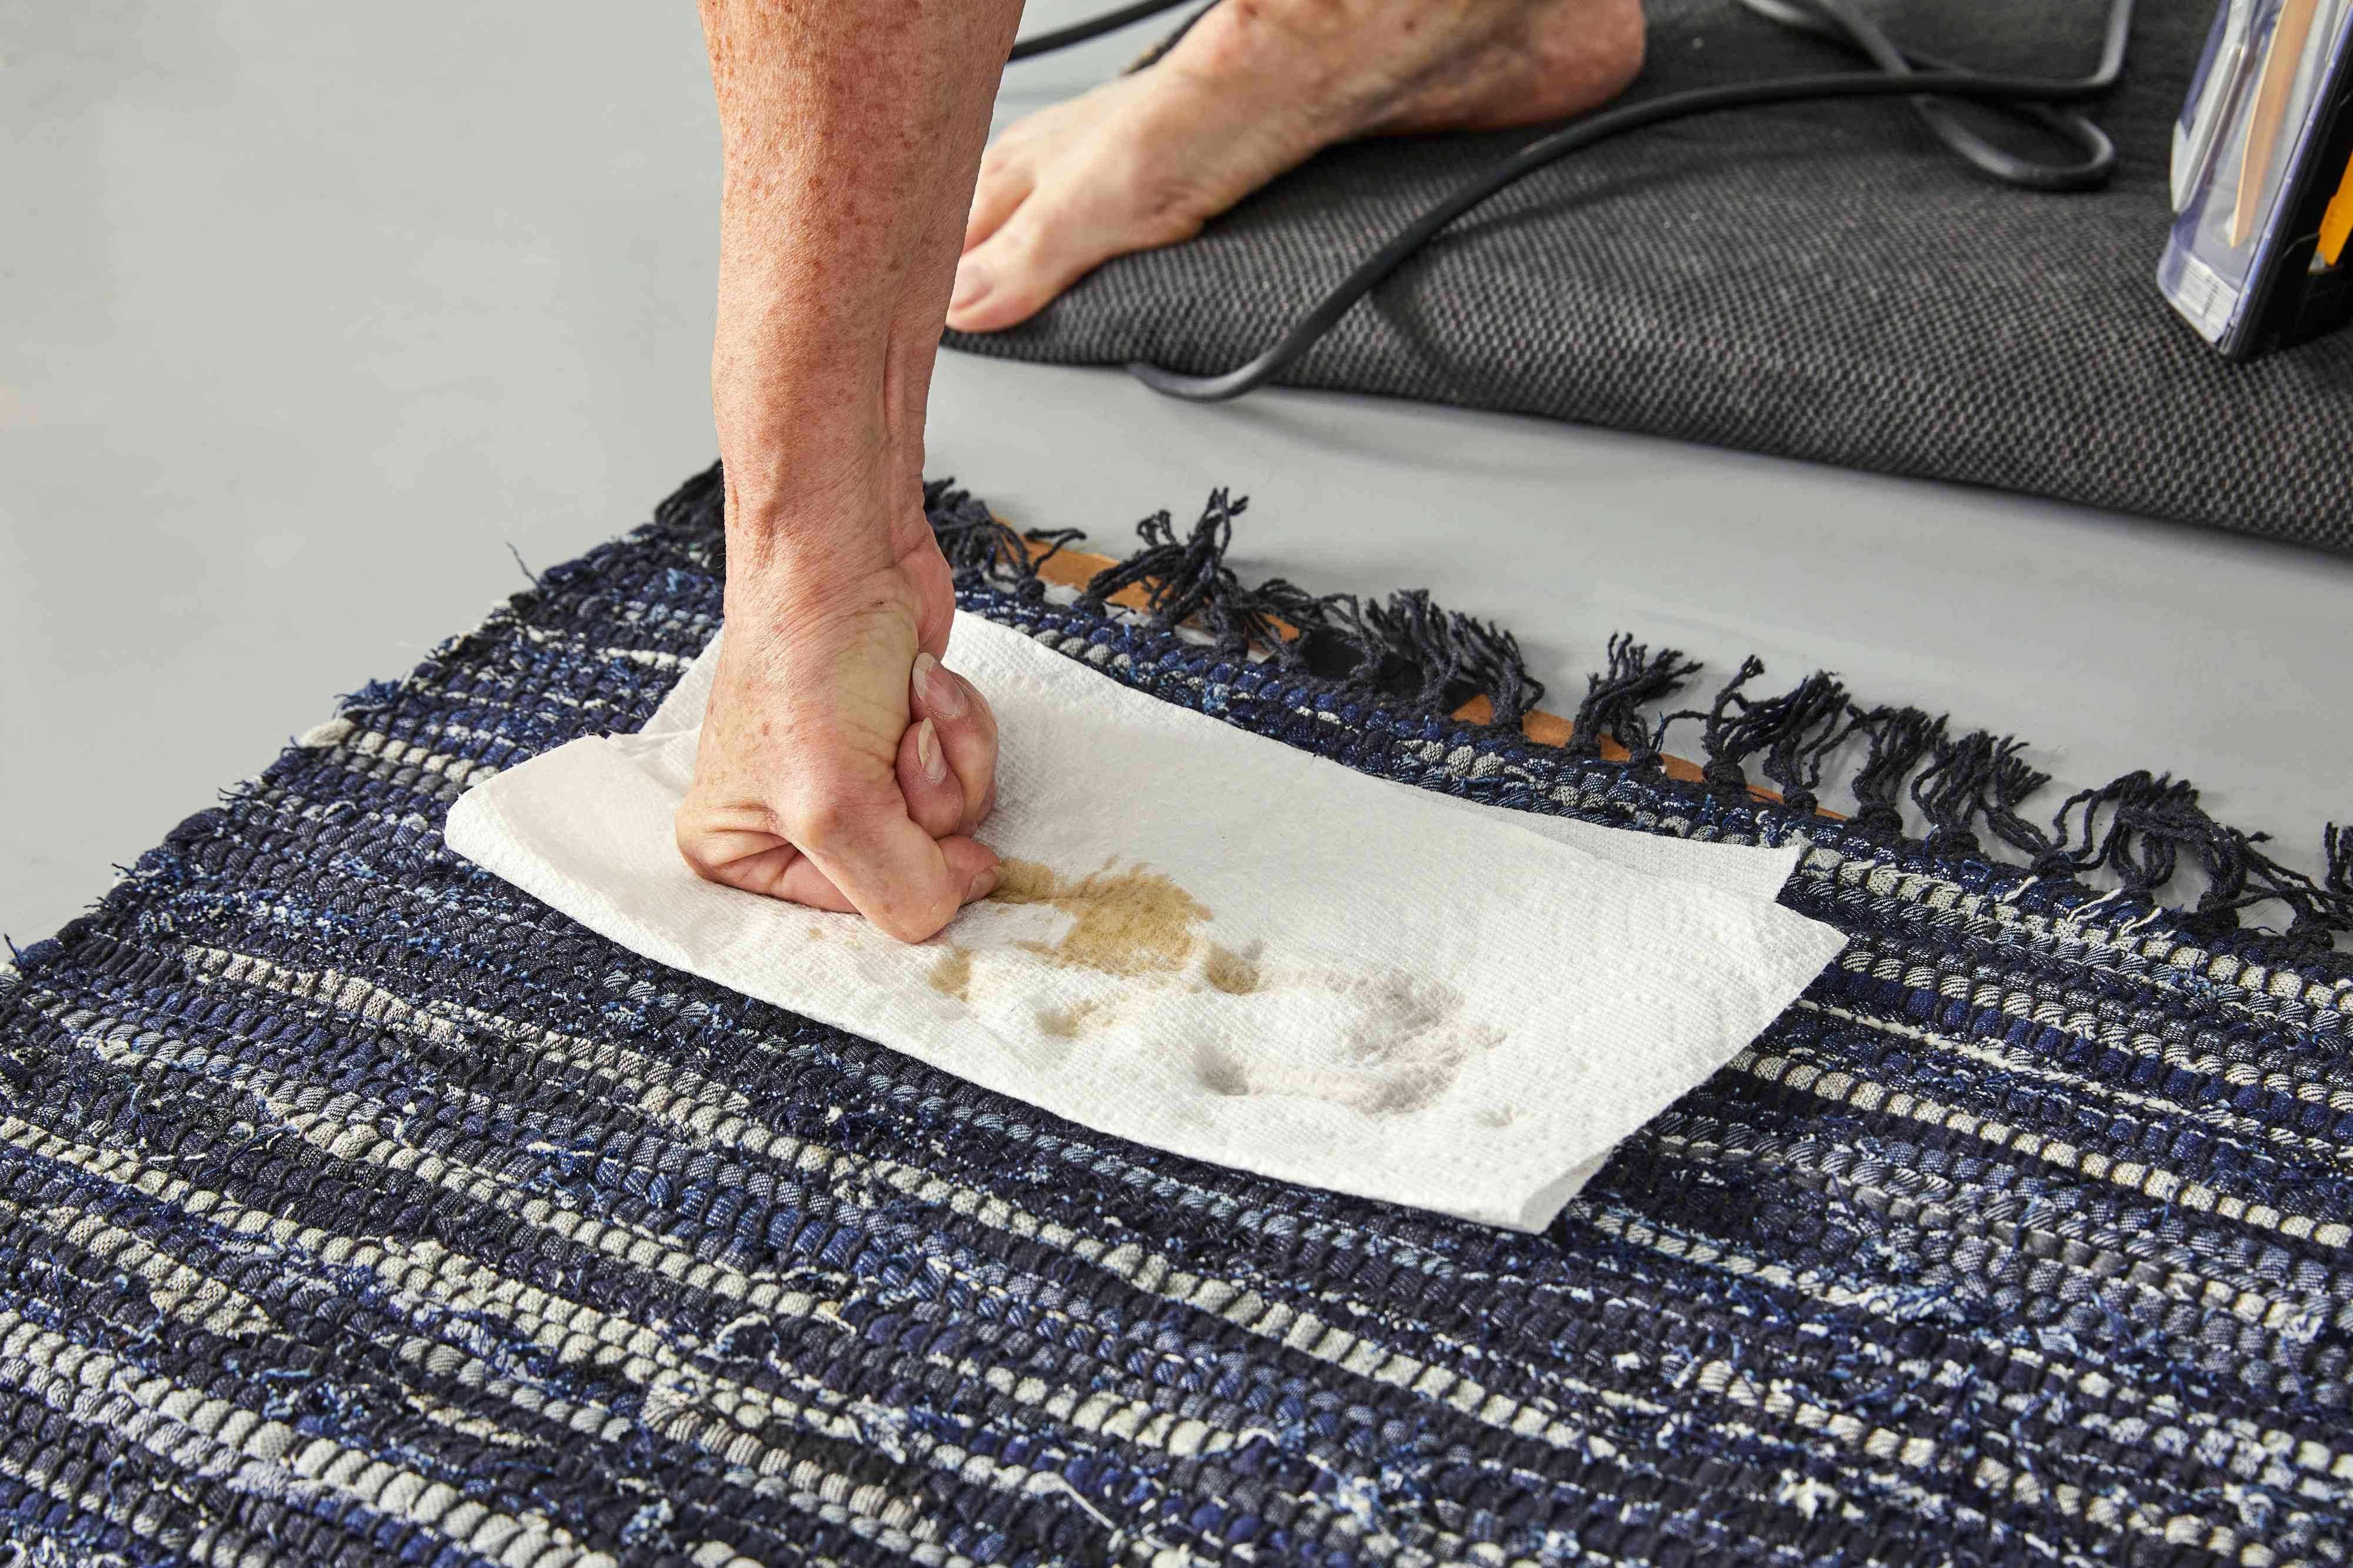 A person pressing down on a paper towel to clean a spill on the Revival Bootcut Washable Rug